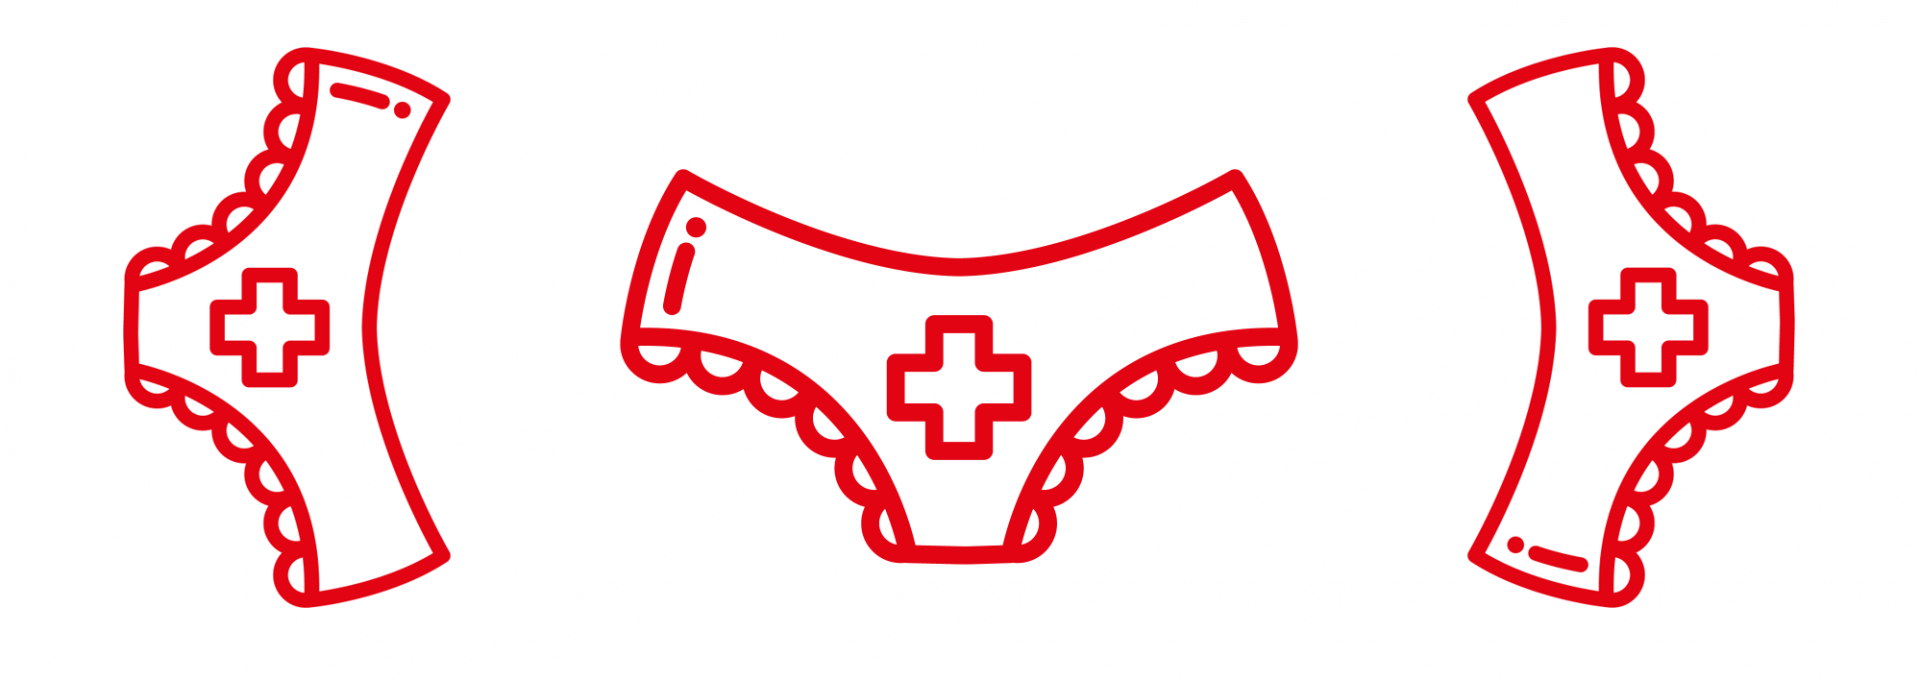 drawn underpants with red cross in it